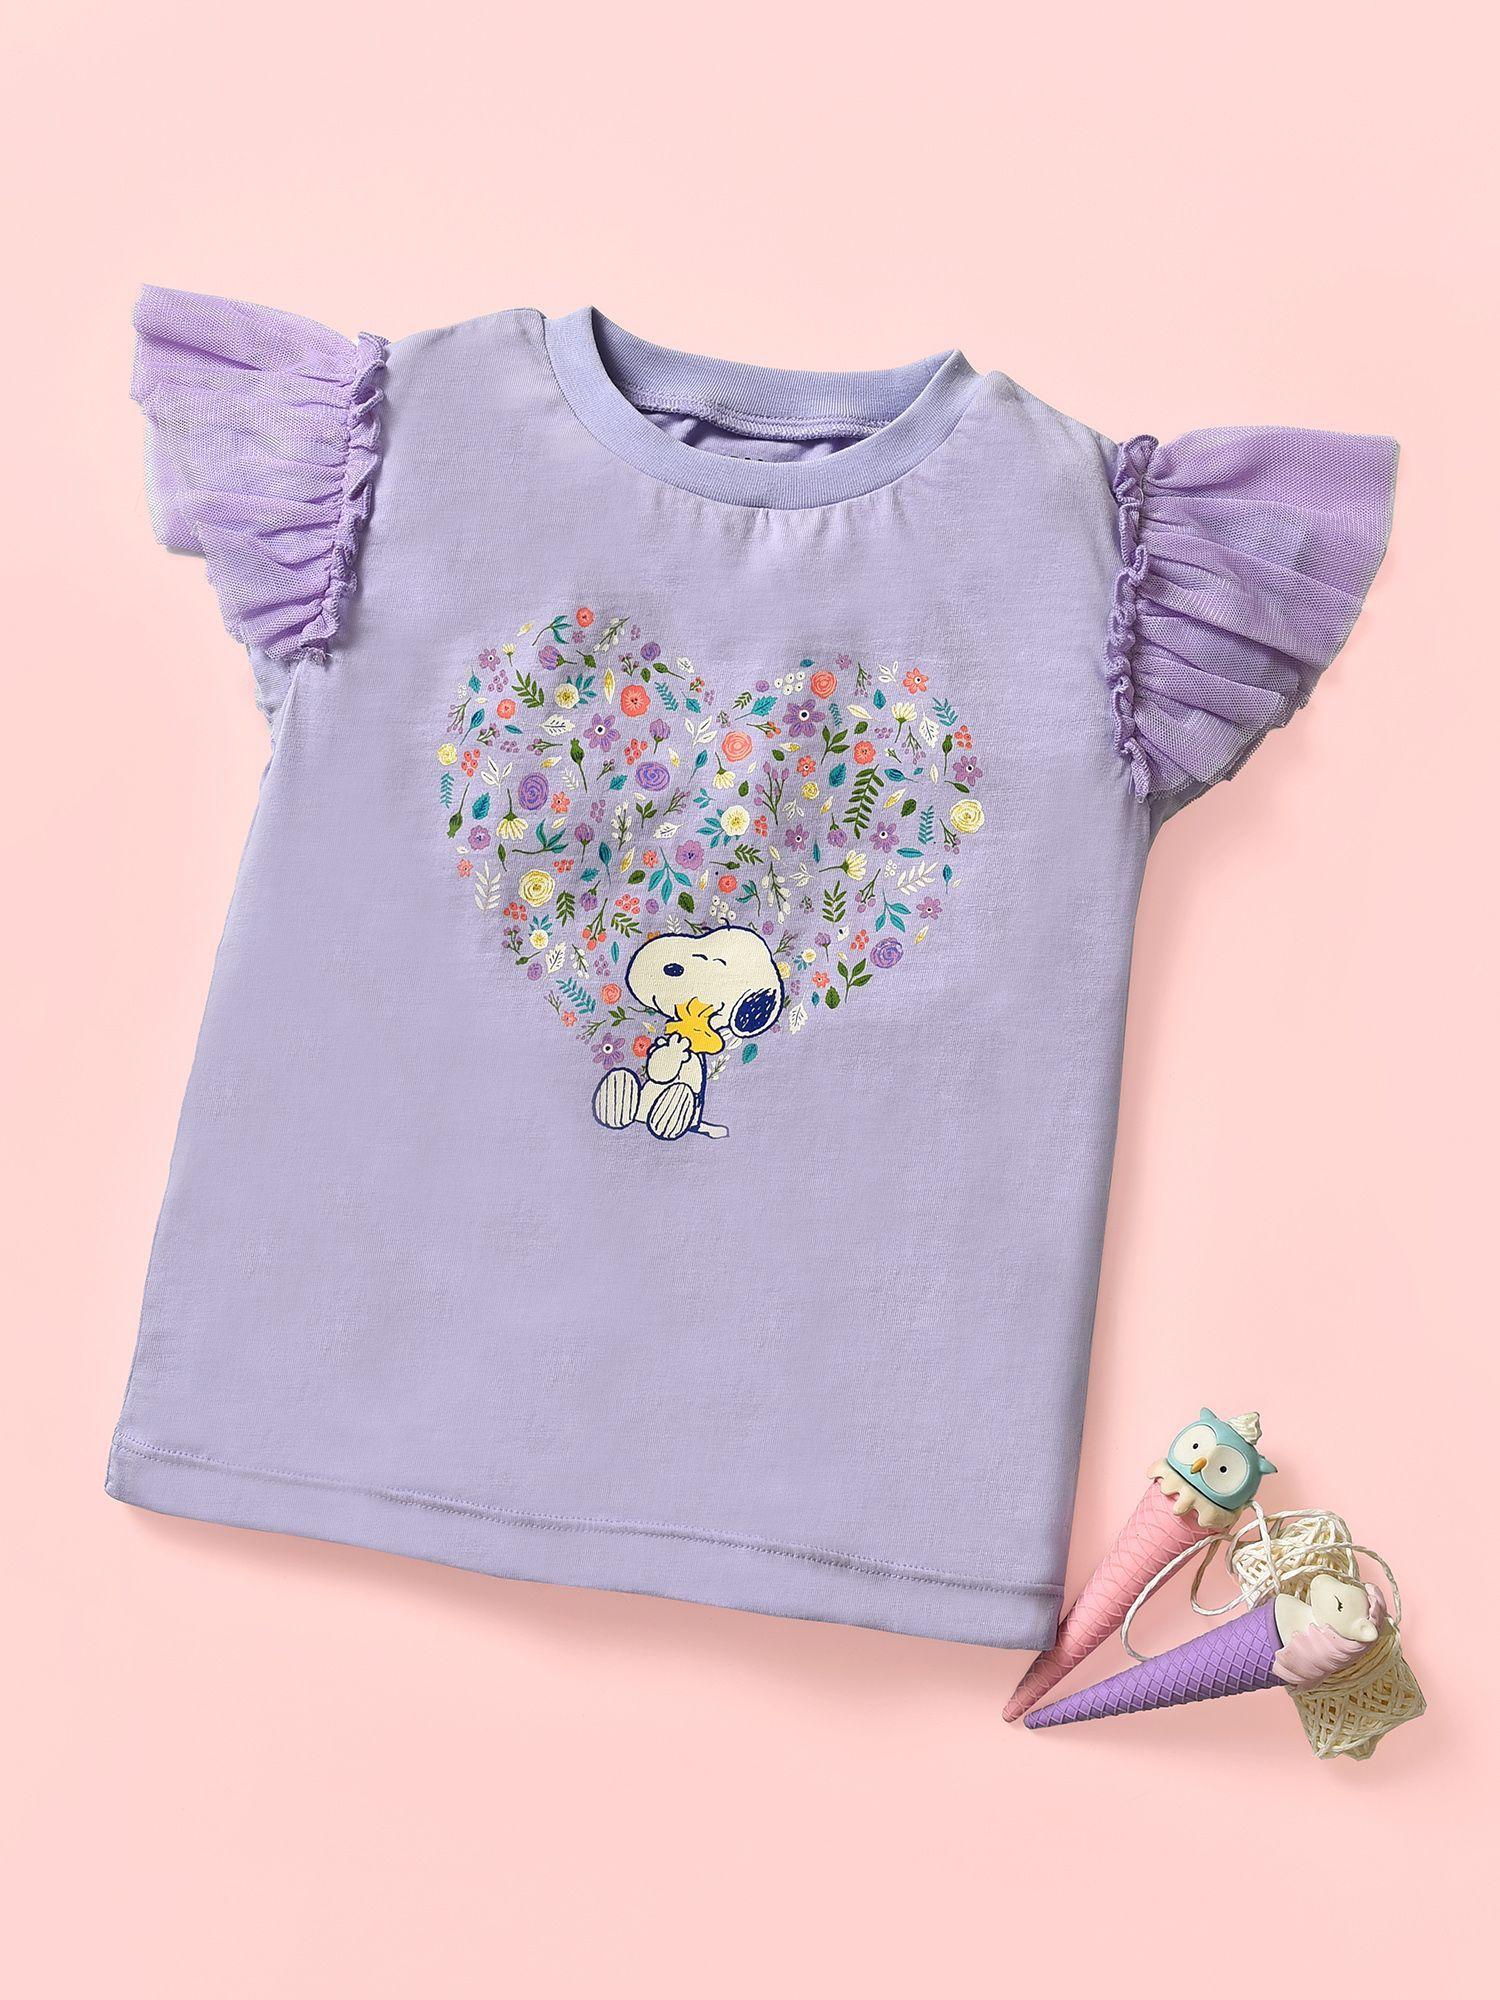 peanuts snoopy printed purple top for girls